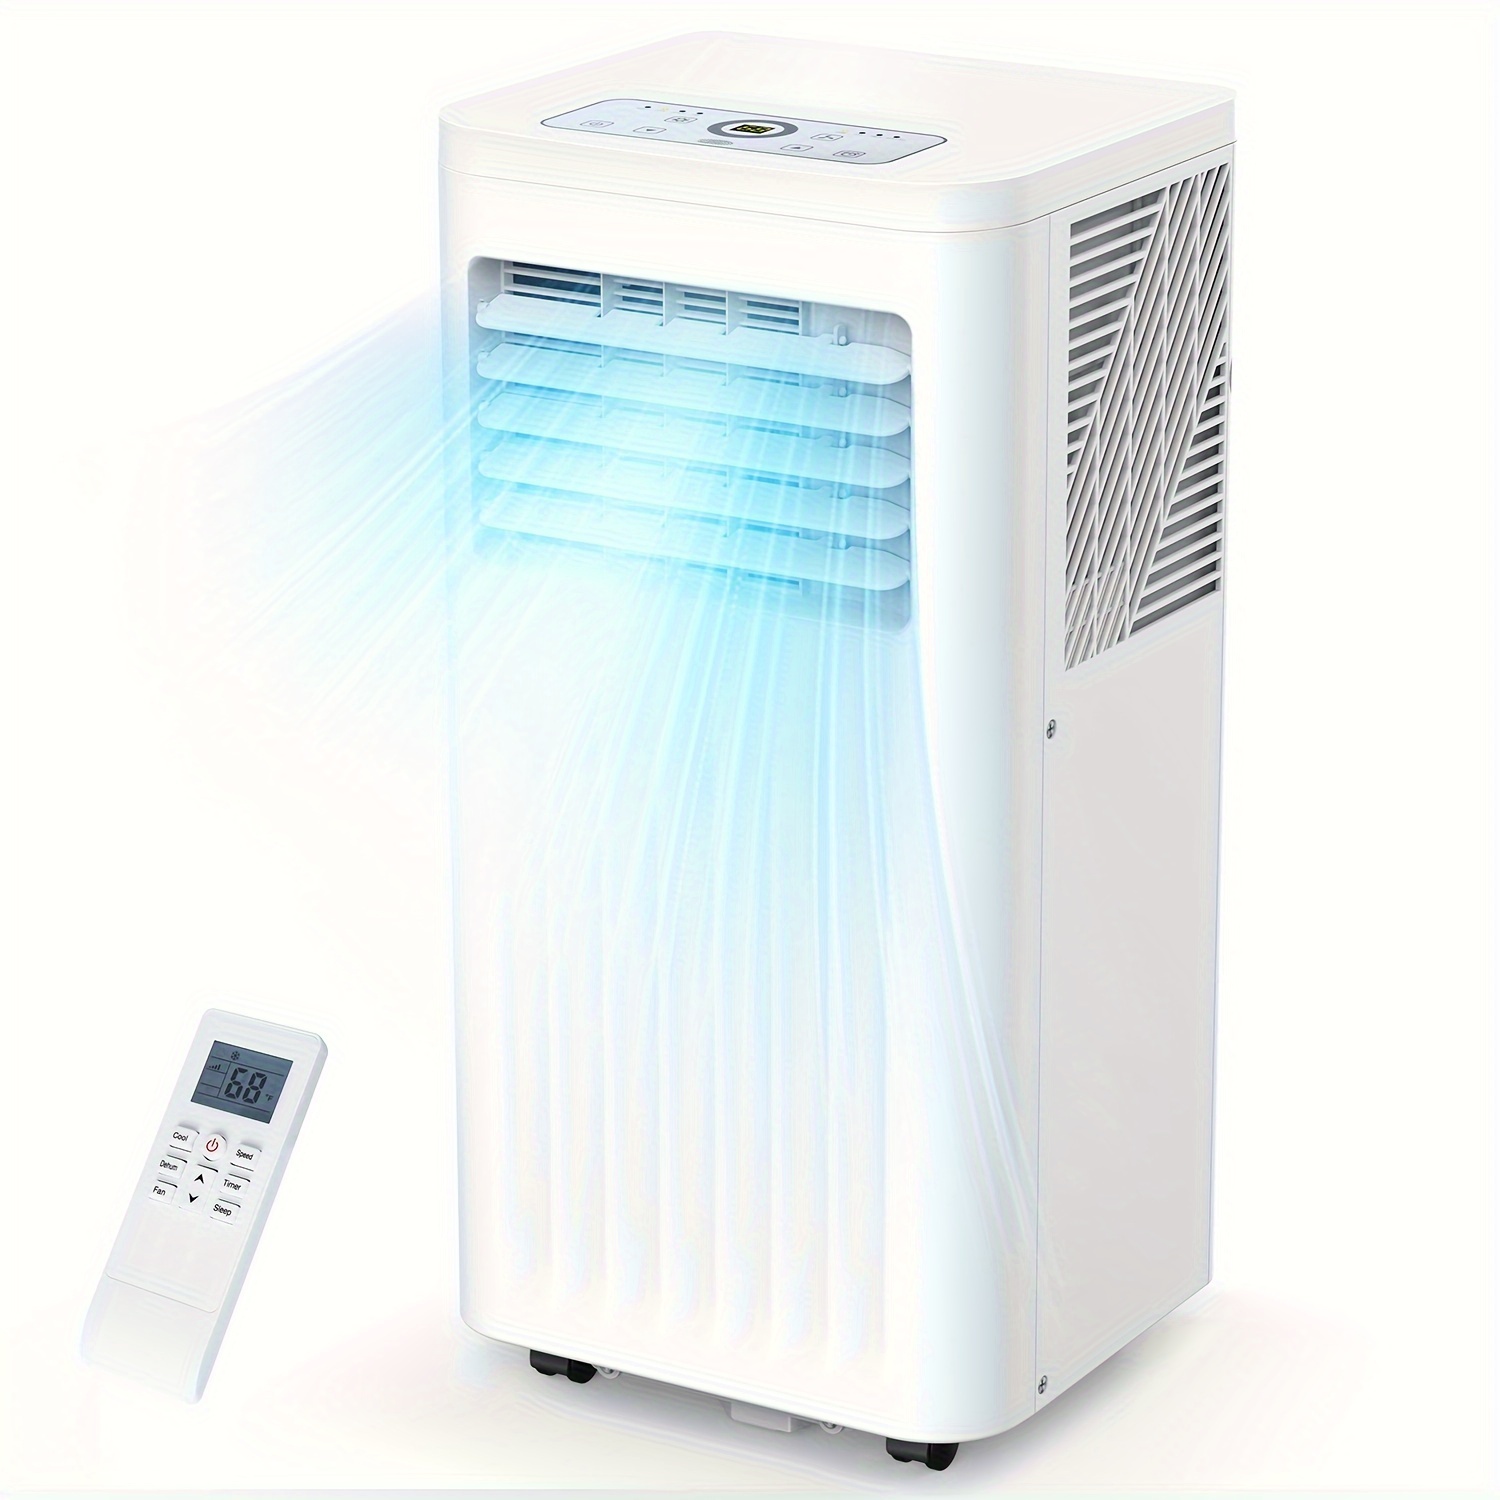 

10000 Btu Ashrae, , Air Conditioner With Cooling, Fan, Dehumidifier, Sleep Mode, ≤55 Db, Cooling Up To 450 Sq. Ft. With 24h Timer/digital Display/remote Control & Window Kit, 6300btu